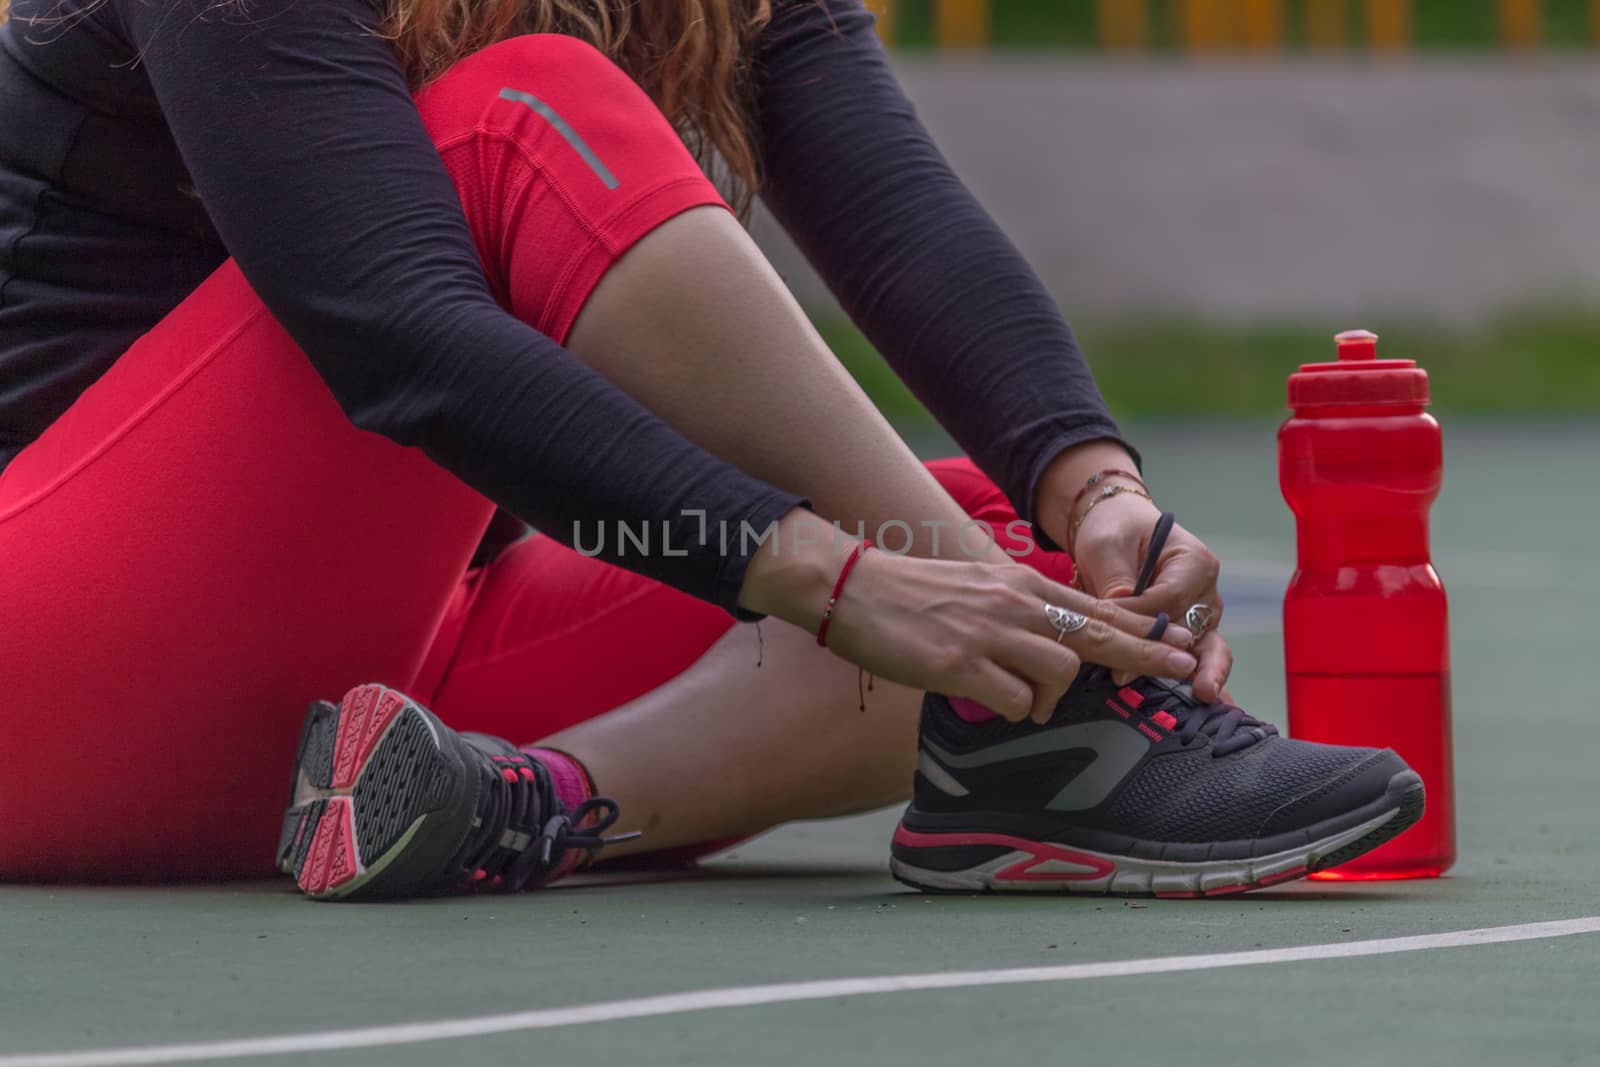 Woman adjusting her tennis shoes before running